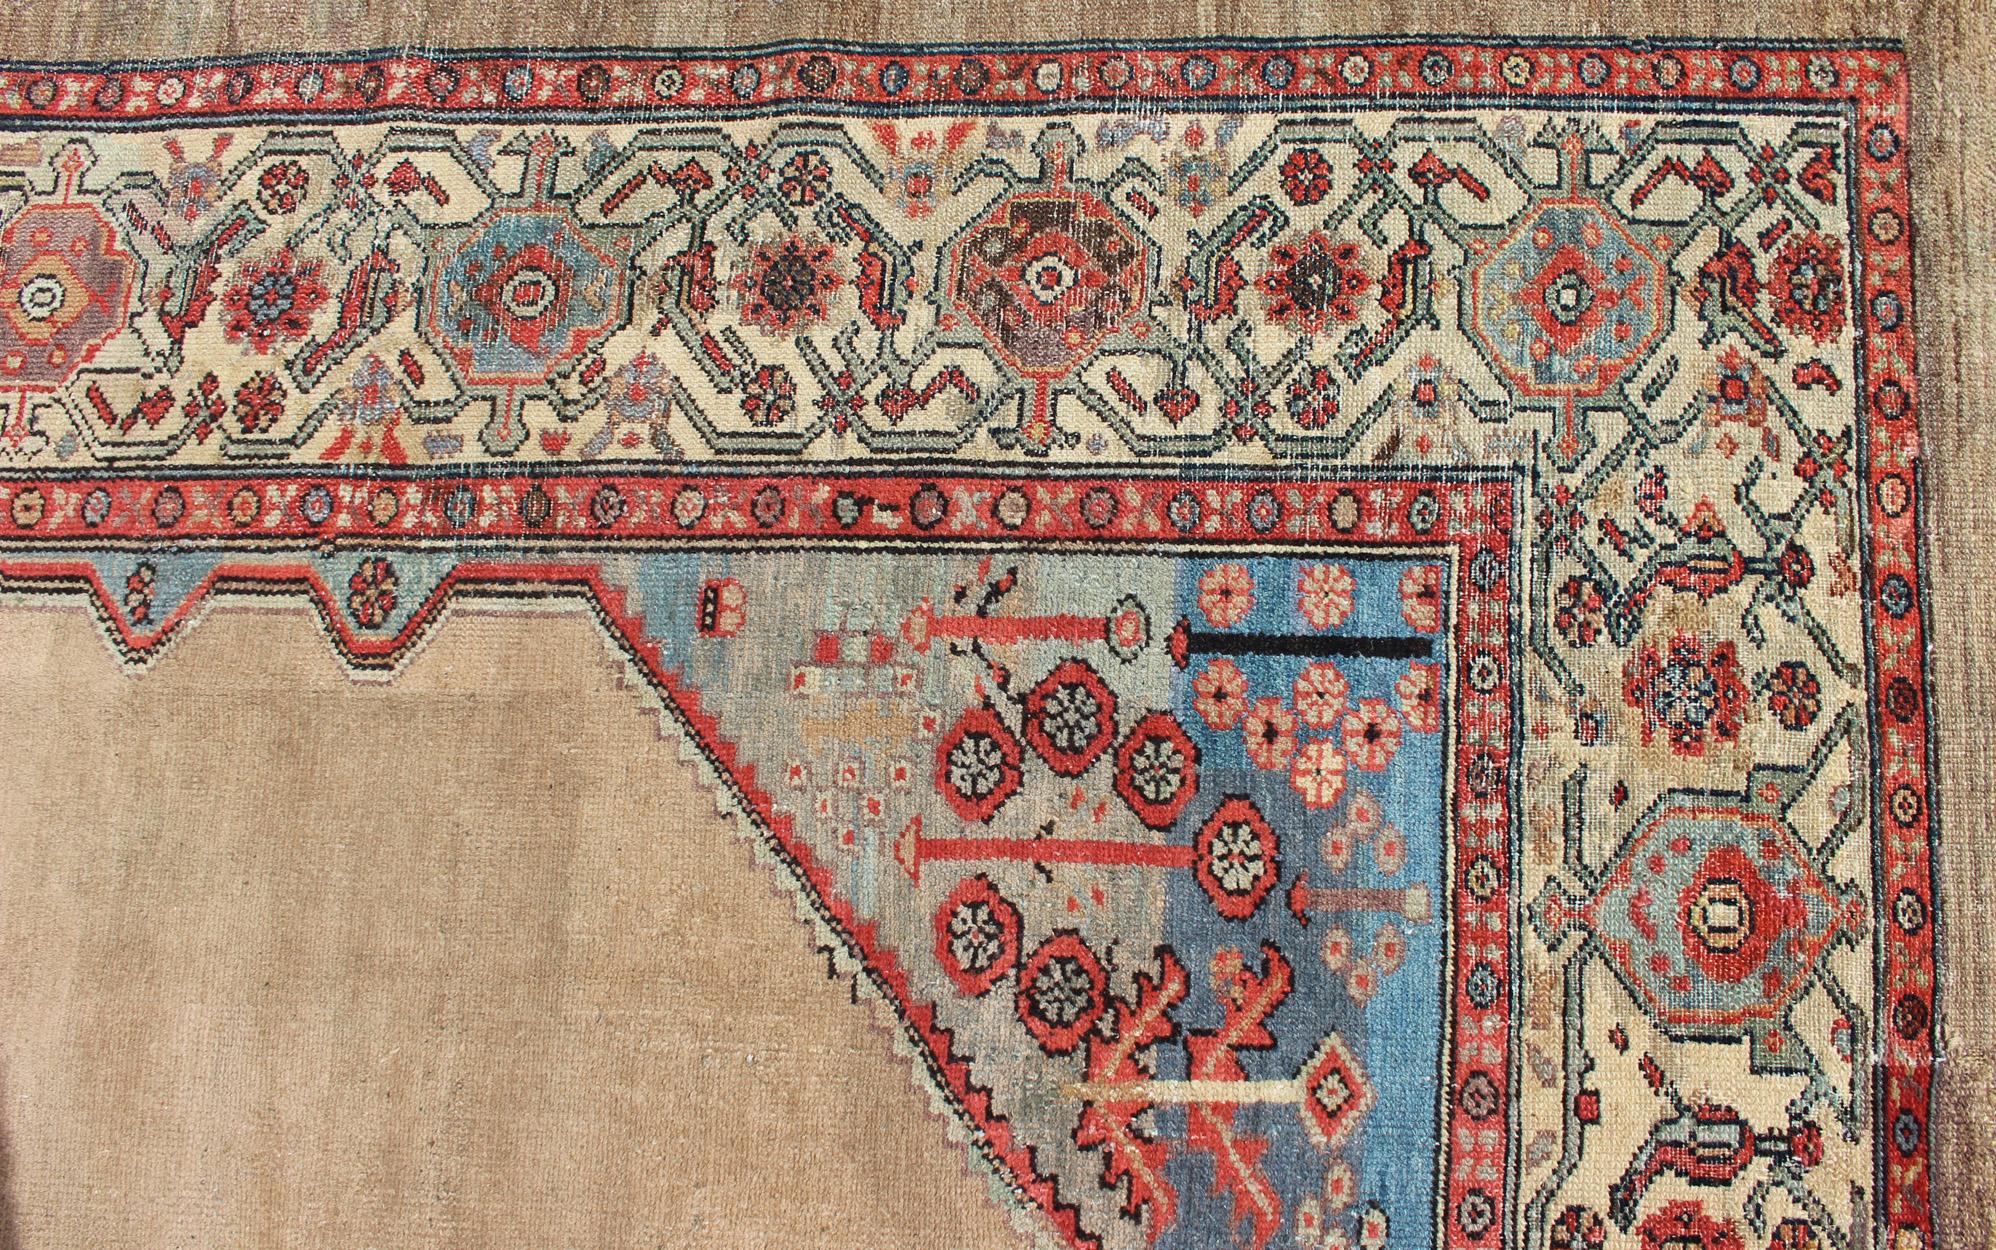 Late 19th Century Camel Hair Antique Persian Serab Rug in Camel Color Background, Blue, Salmon  For Sale